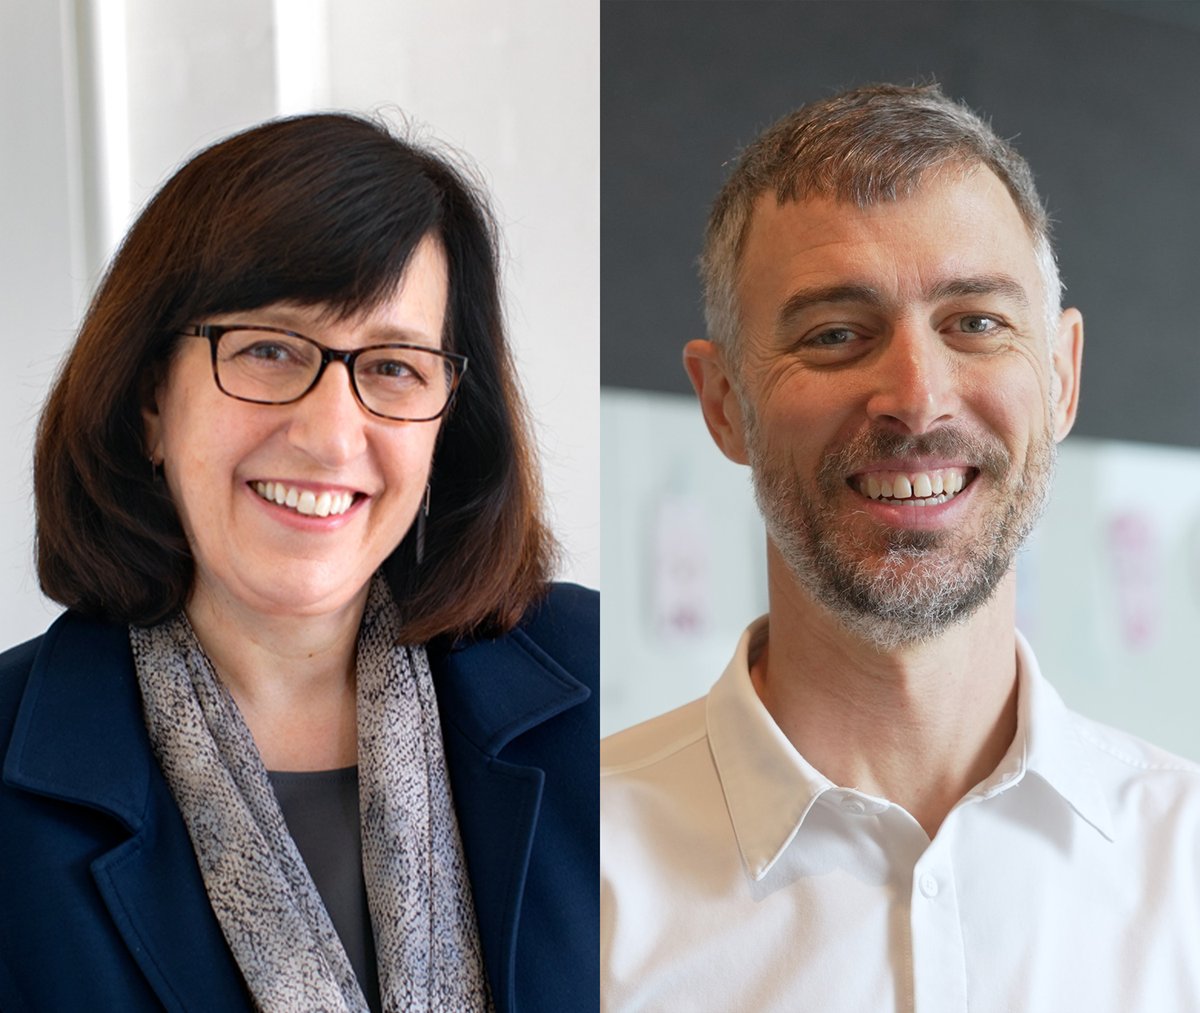 Tune in today from 5:00–6:00 p.m. EDT for the Hatfield Lecture! Samsara Co-Founder and CTO John Bicket '02 and Cornell University President Martha E. Pollack discuss how technology is transforming the world of operations and global infrastructure. ➡️ cornel.ly/3kDlaCV